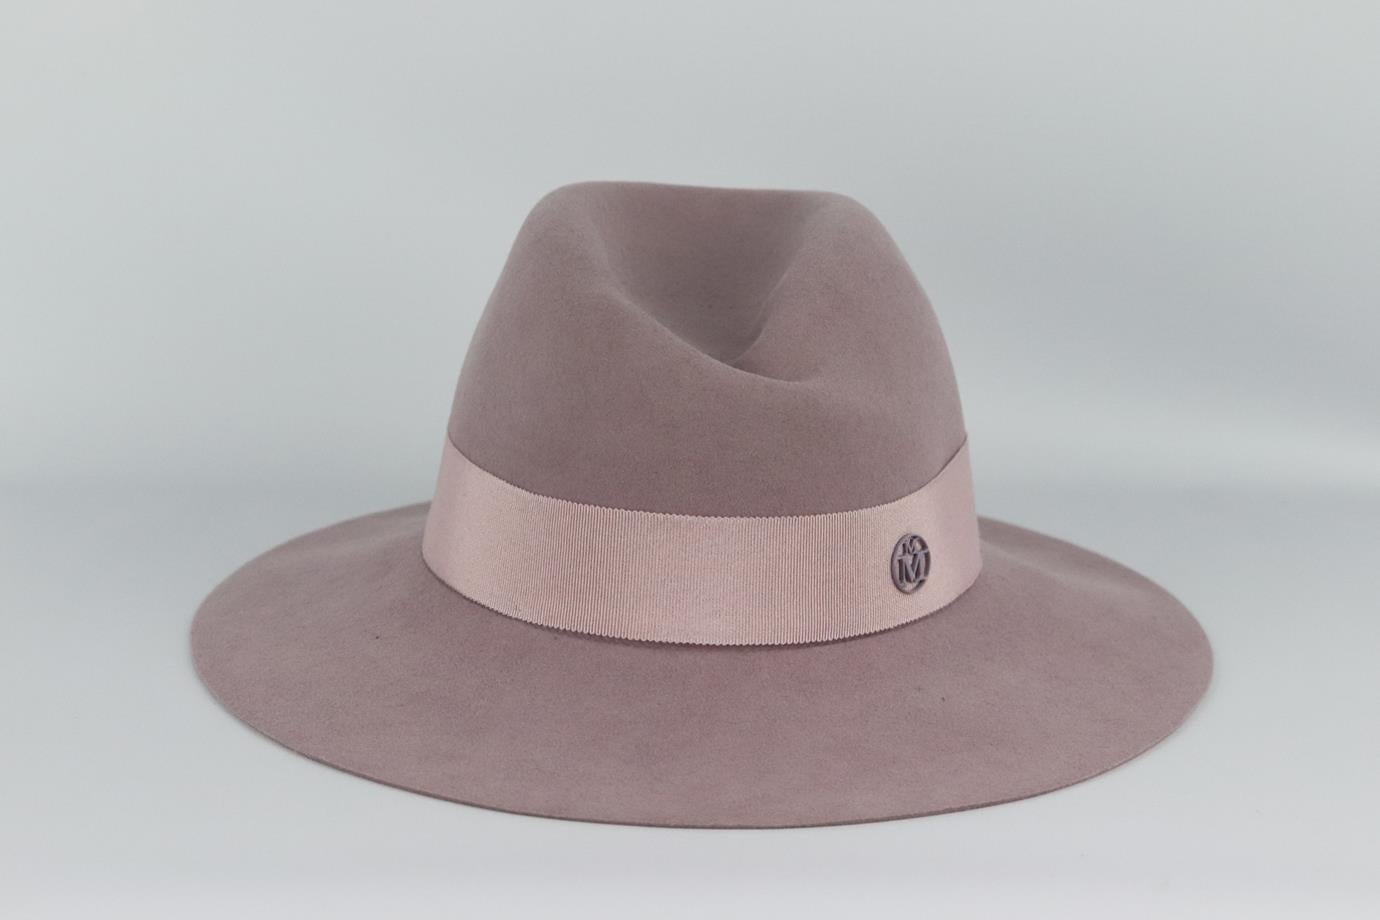 Maison Michel grosgrain trimmed wool felt fedora. Pink. Pull on. 100% Wool; trim: 56% cotton, 44% viscose. Does not come with dustbag or box. Size: Medium. Circumference: 23.6 in. Brim Width: 3.25 in. Very good condition - No sign of wear; see